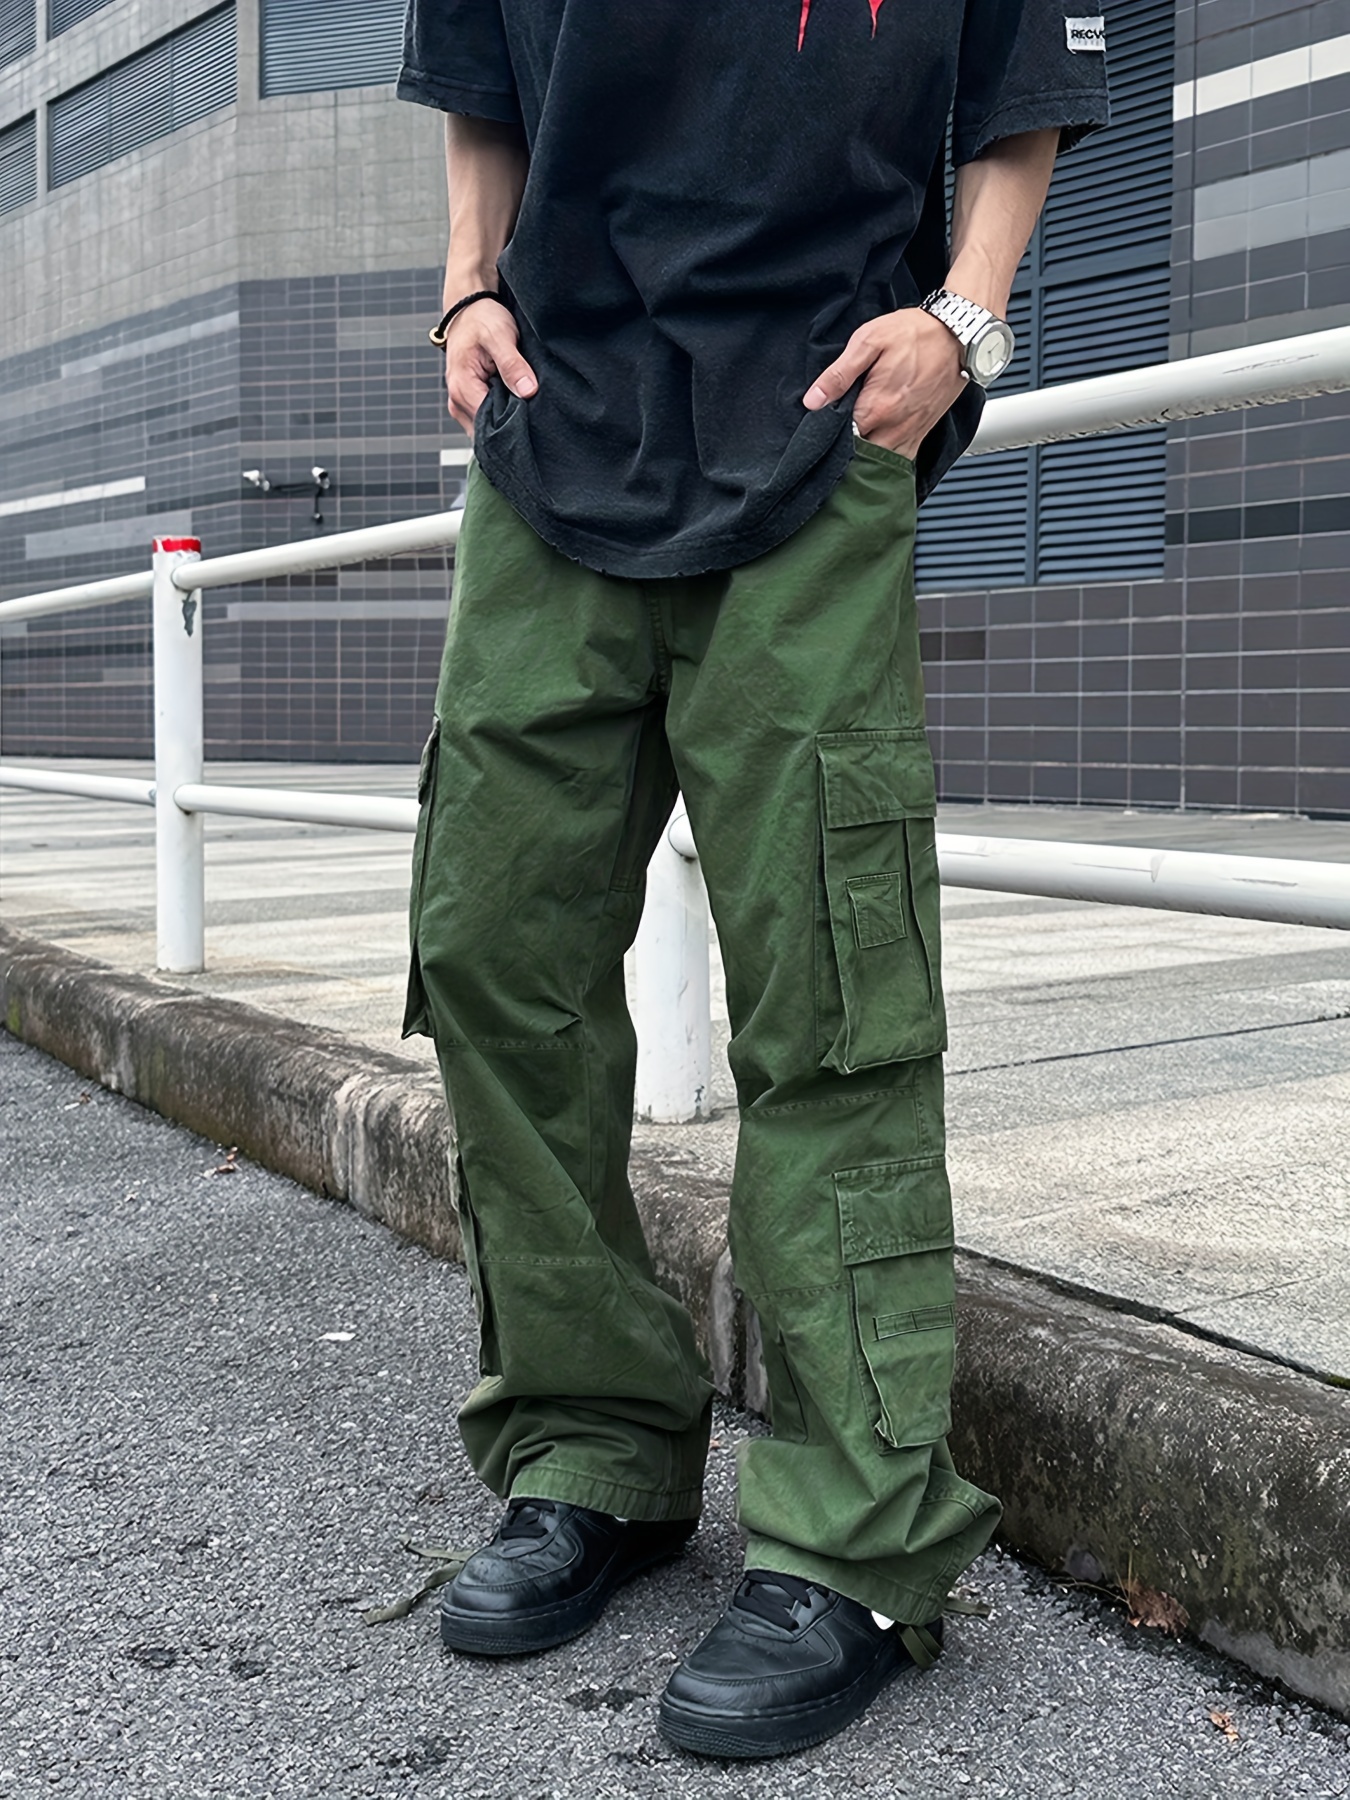 Baggy cotton pants with multiple pockets for men